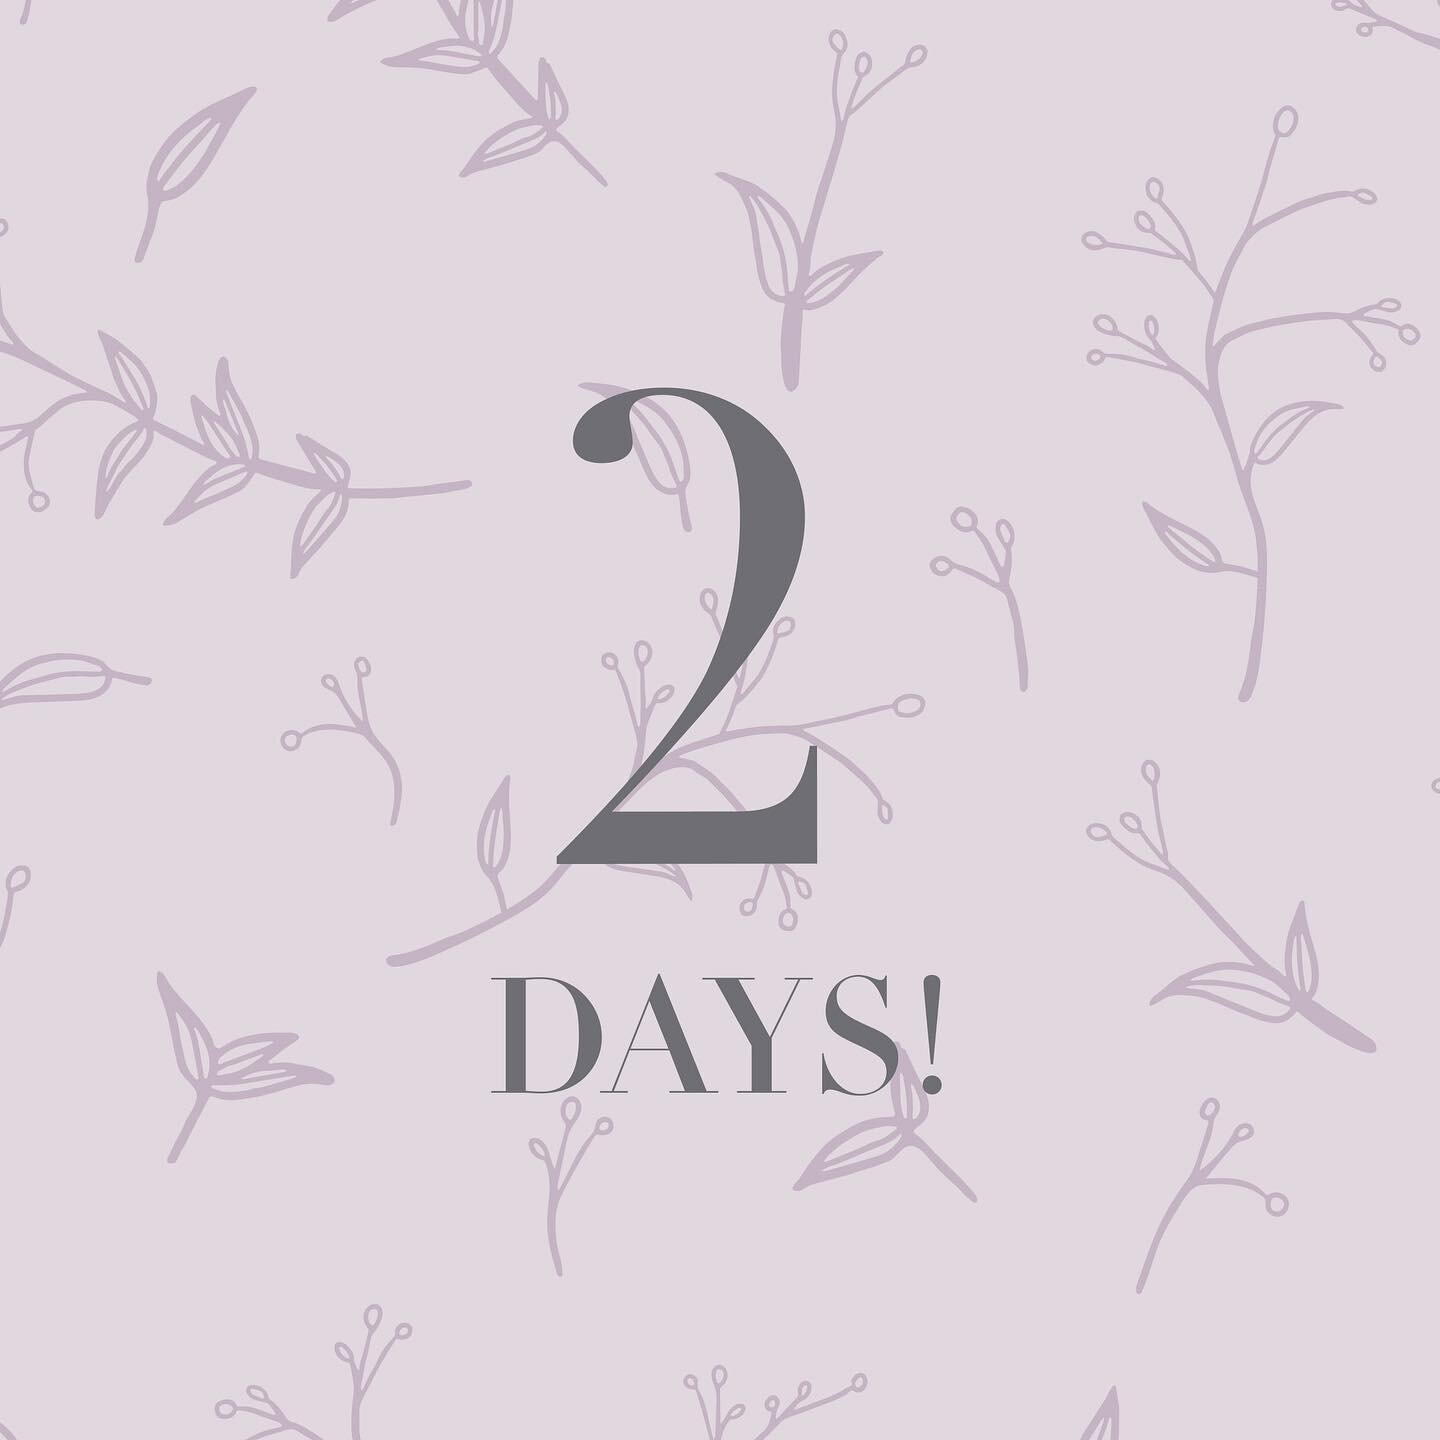 Two days left until my website launch!

www.imprintsandink.com will go live this Saturday. The&ldquo;Rare Treasures&rdquo; collection will be available to shop on the site and you will be able to find out all about the inspiration behind my designs.
